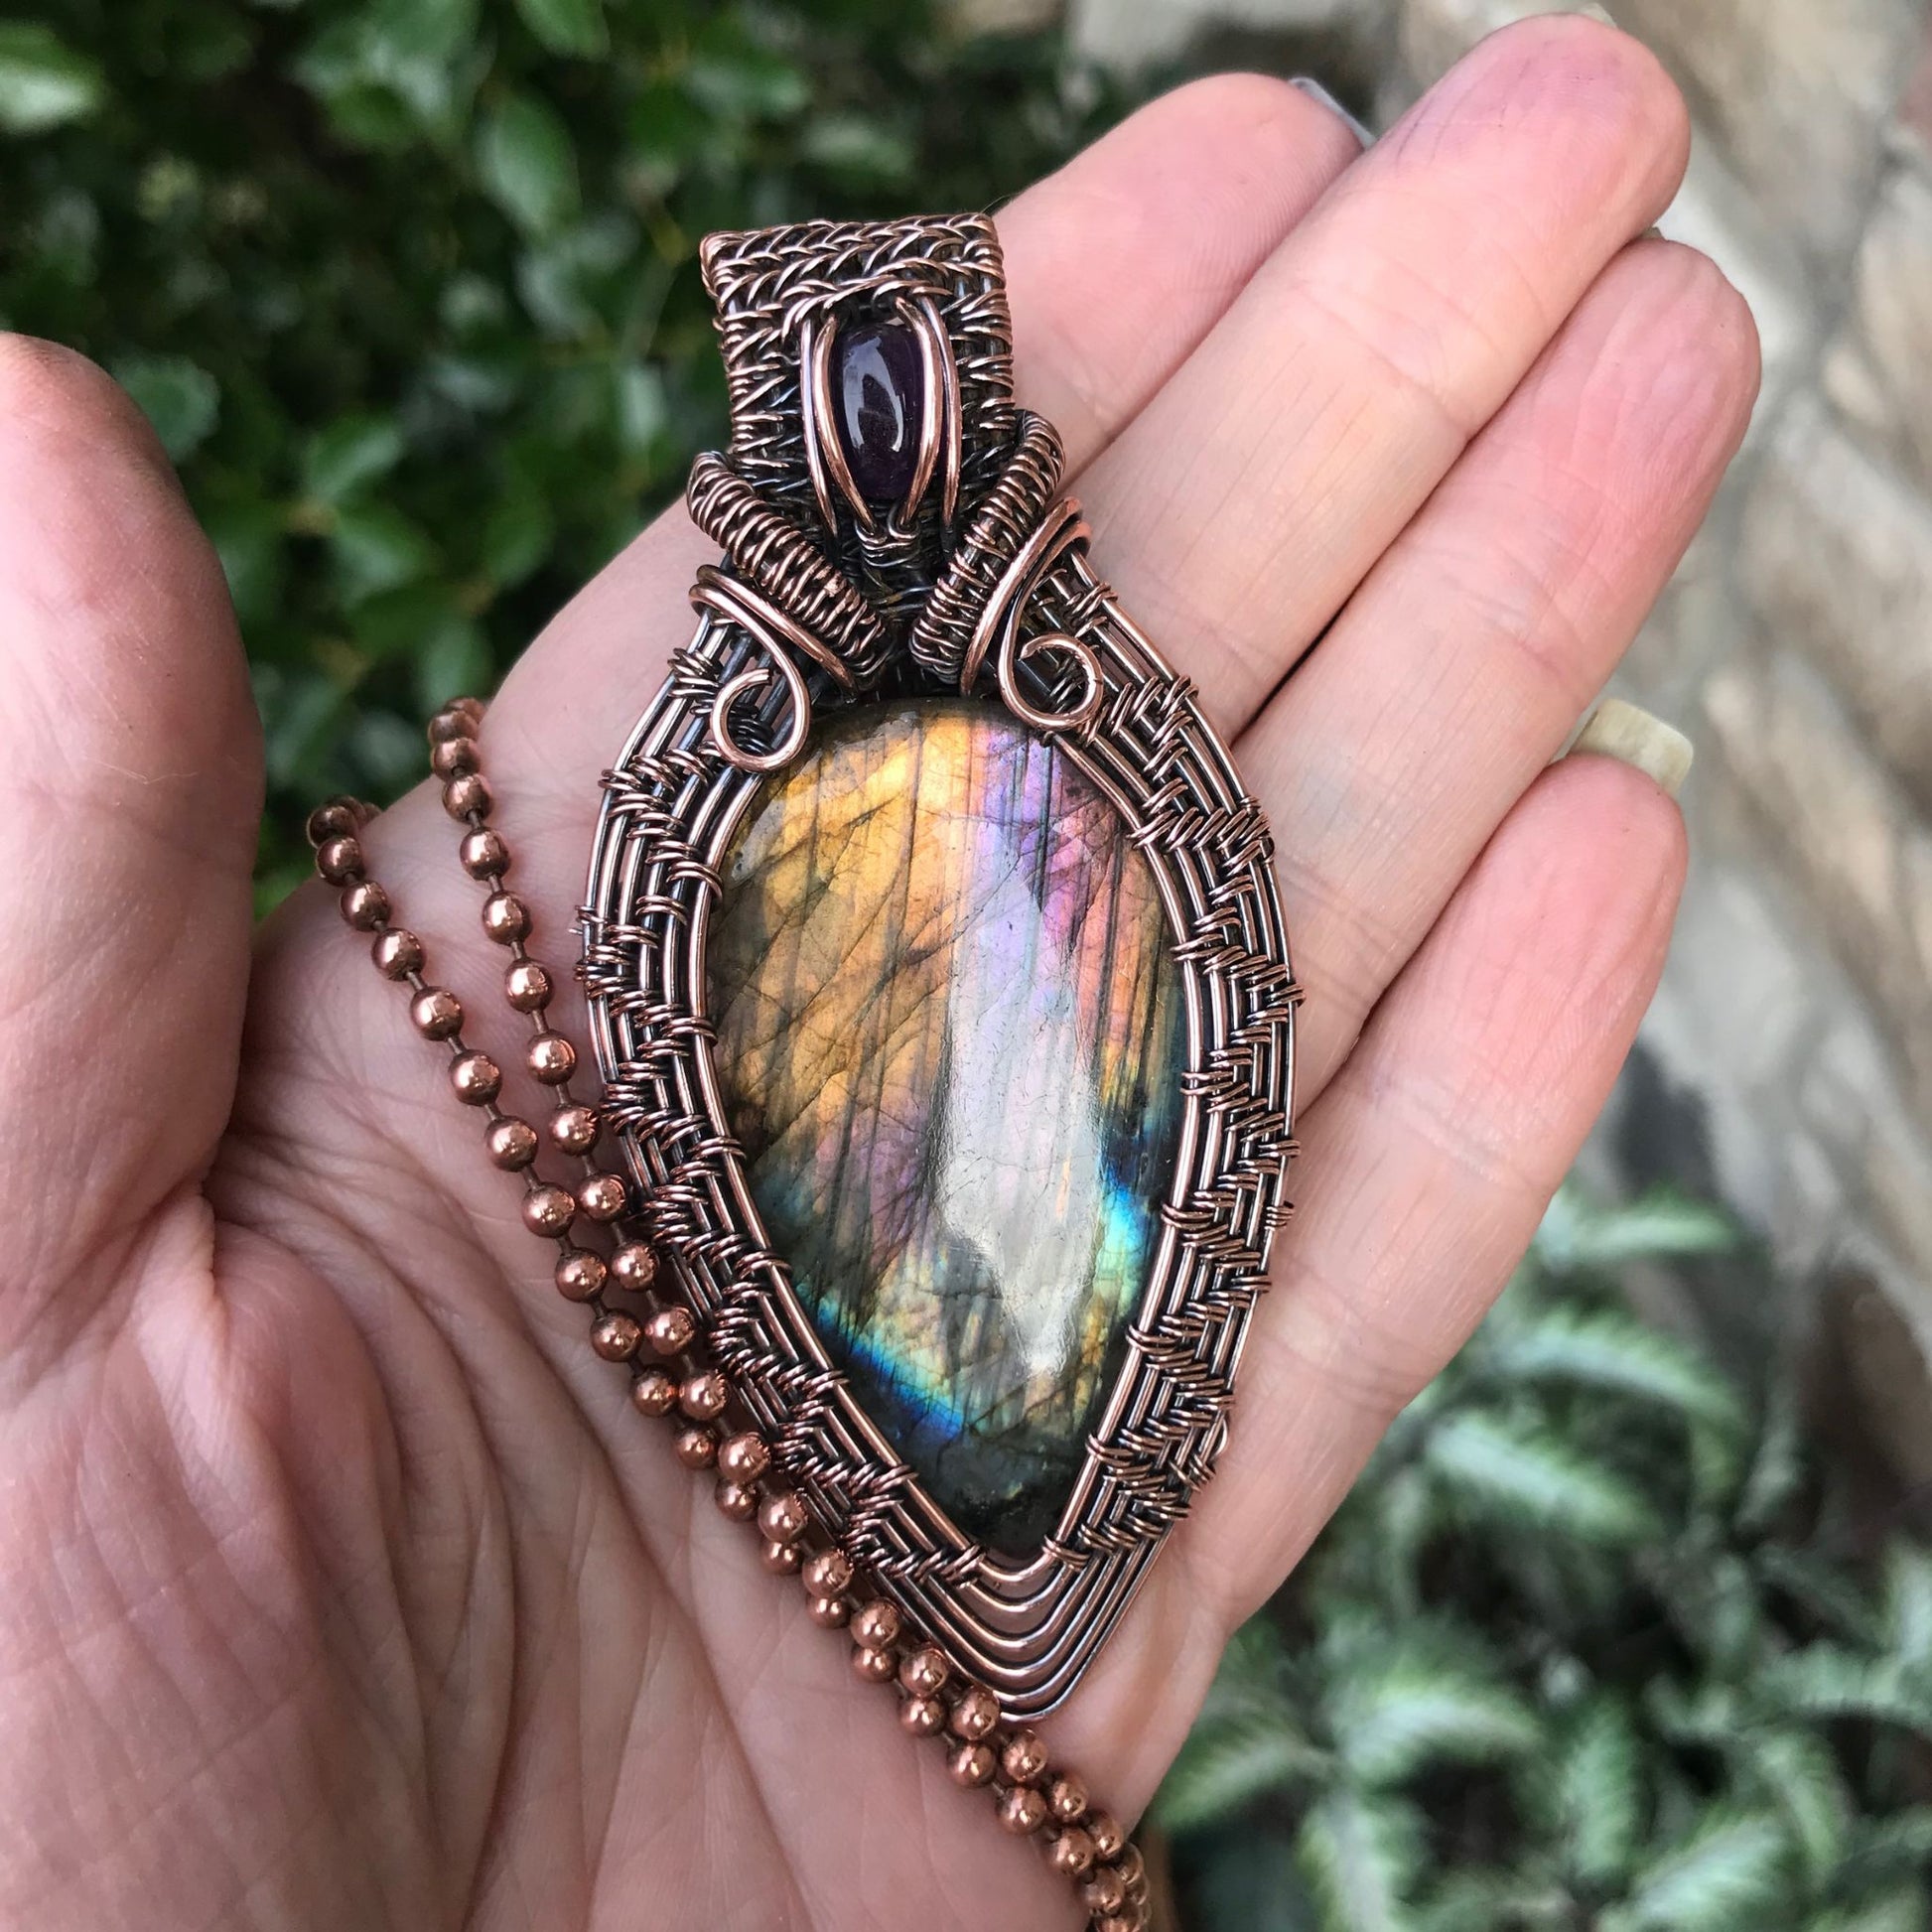 rainbow-labradorite-amethyst-wire-wrapped-woven-copper-pendant-necklace-moonlet-jewelry